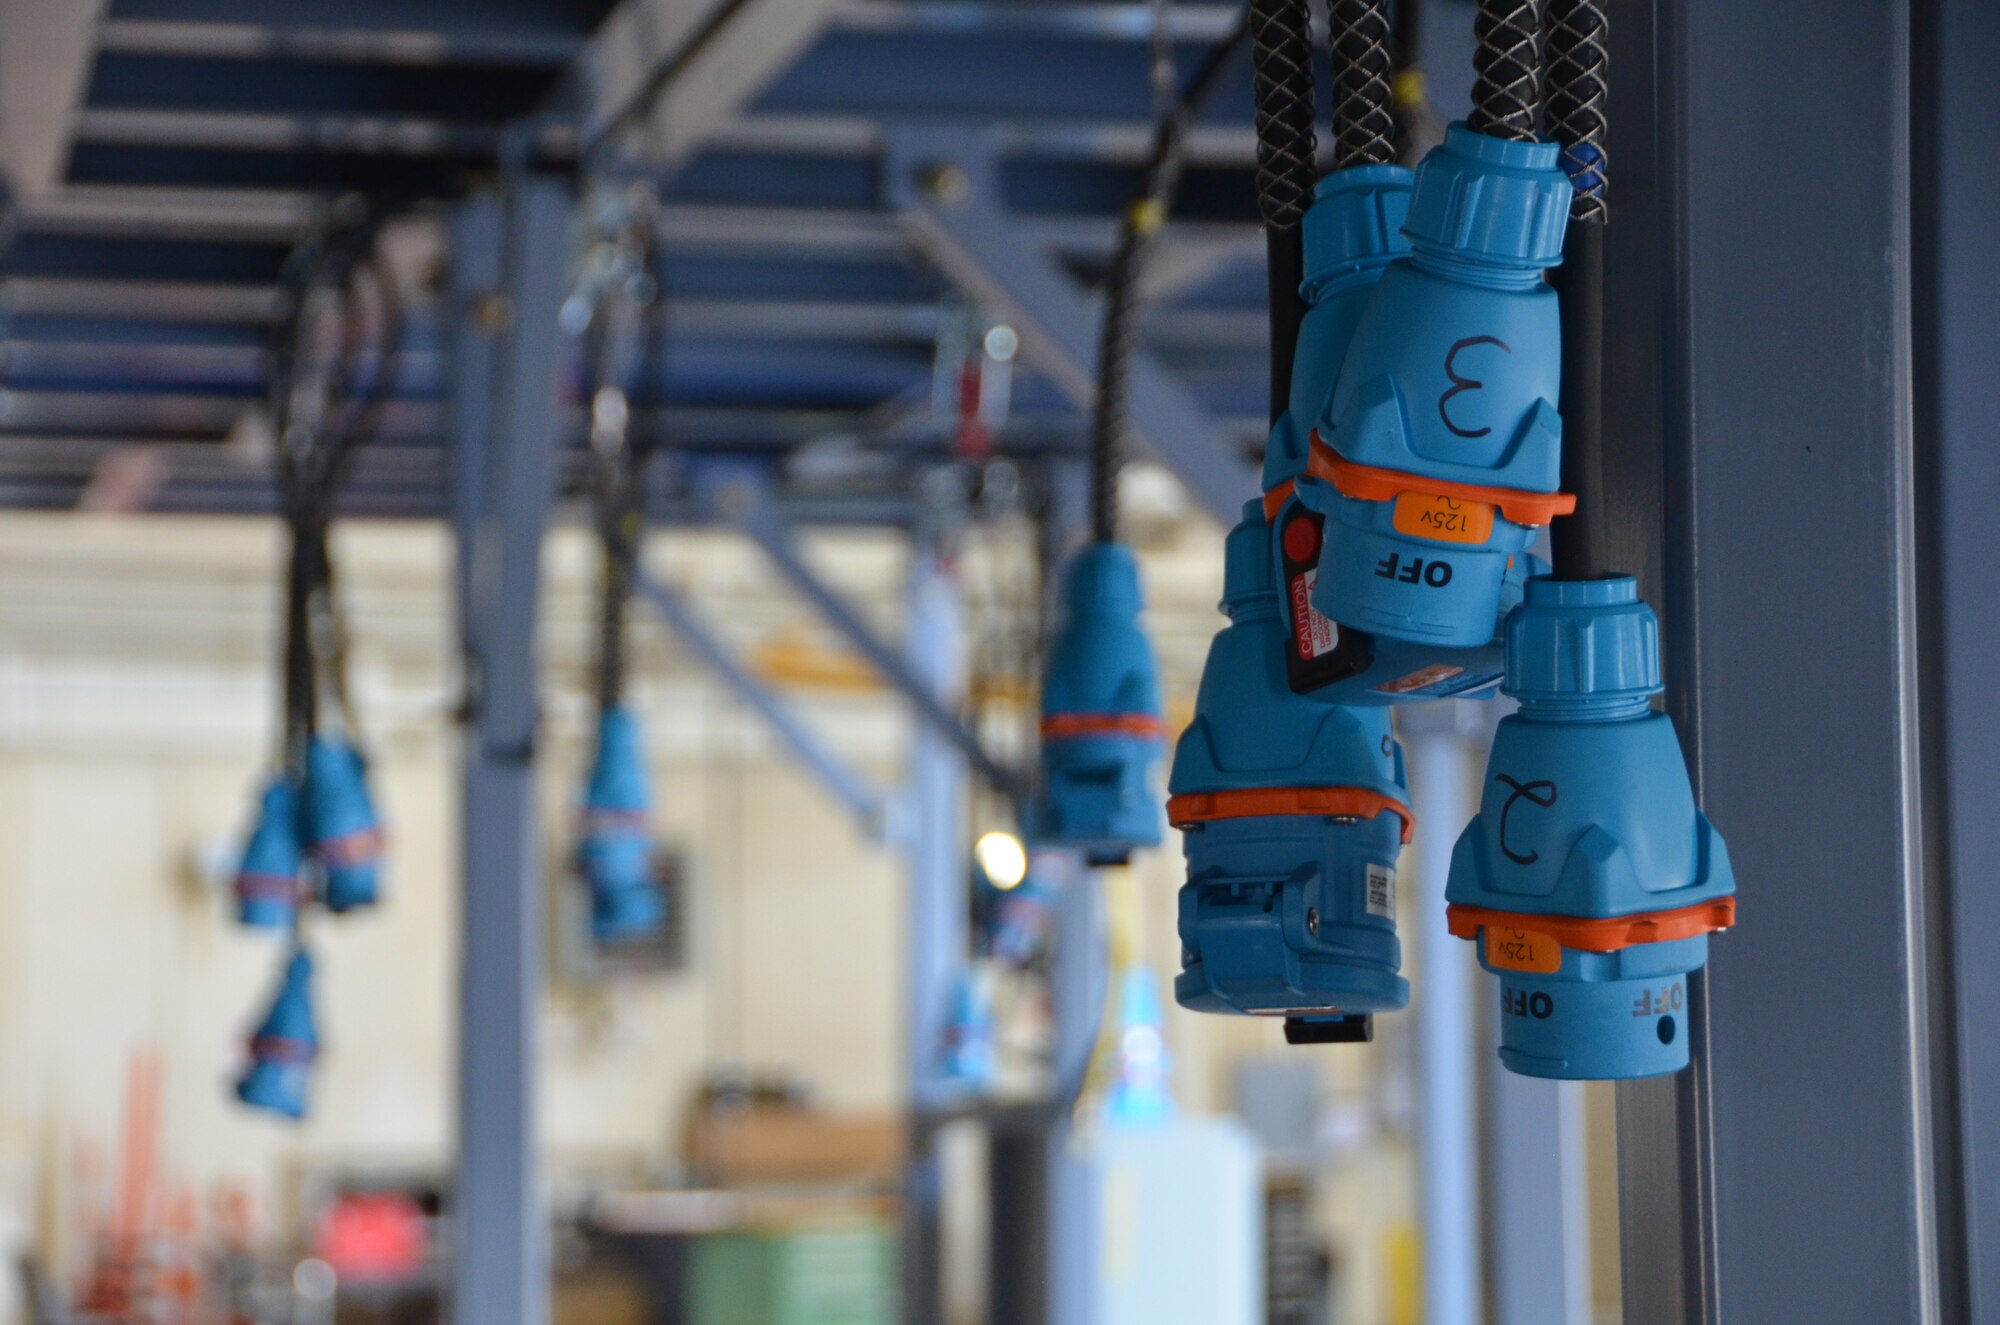 Electrical plugs hang ready to install to provide power to the Isochronal Inspection (ISO) Aircraft Maintenance Platforms that are prepositioned in the C-130 maintenance hangar at the North Carolina Air National Guard Base, Charlotte Douglas International Airport; May 30, 2015. The new ISO stands provide 145th Airlift Wing maintainers quicker and safer access to all areas of the C-130 aircraft compared to the old stand system. (U.S. Air National Guard photo by Master Sgt. Patricia F. Moran, 145th Public Affairs/Released)